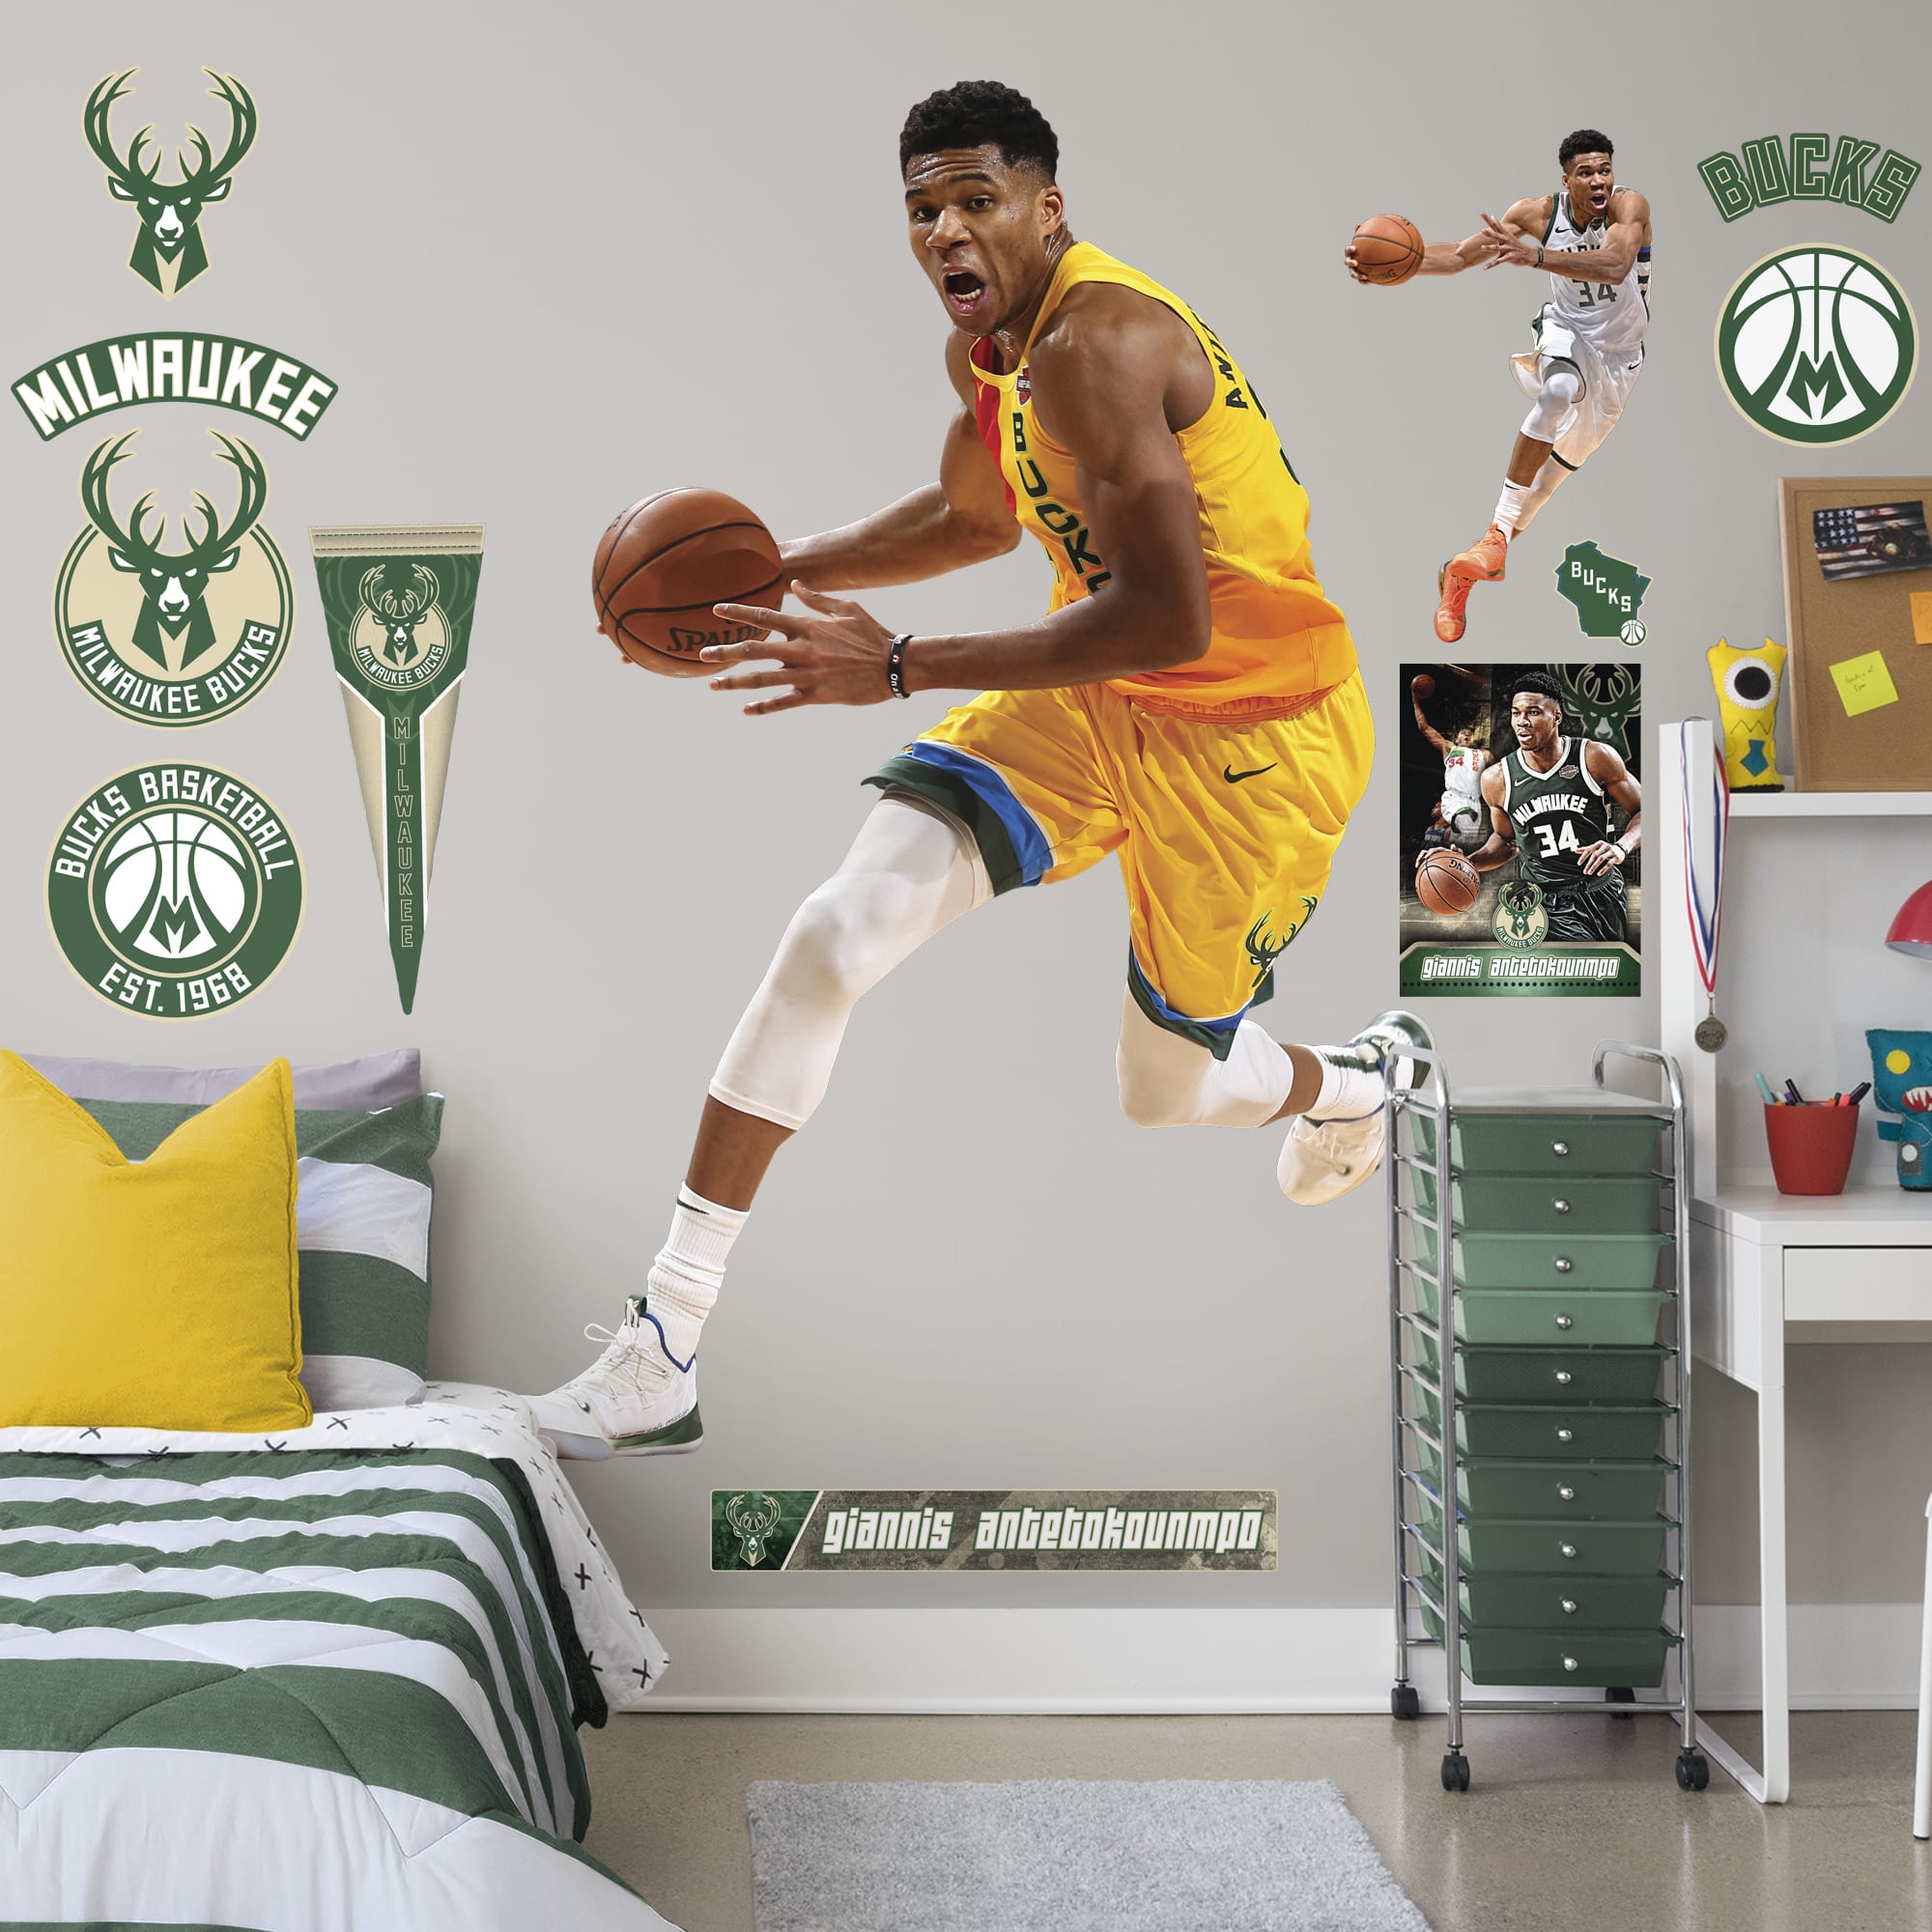 Giannis Antetokounmpo for Milwaukee Bucks: City Jersey - Officially Licensed NBA Removable Wall Decal Life-Size Athlete + 13 Dec